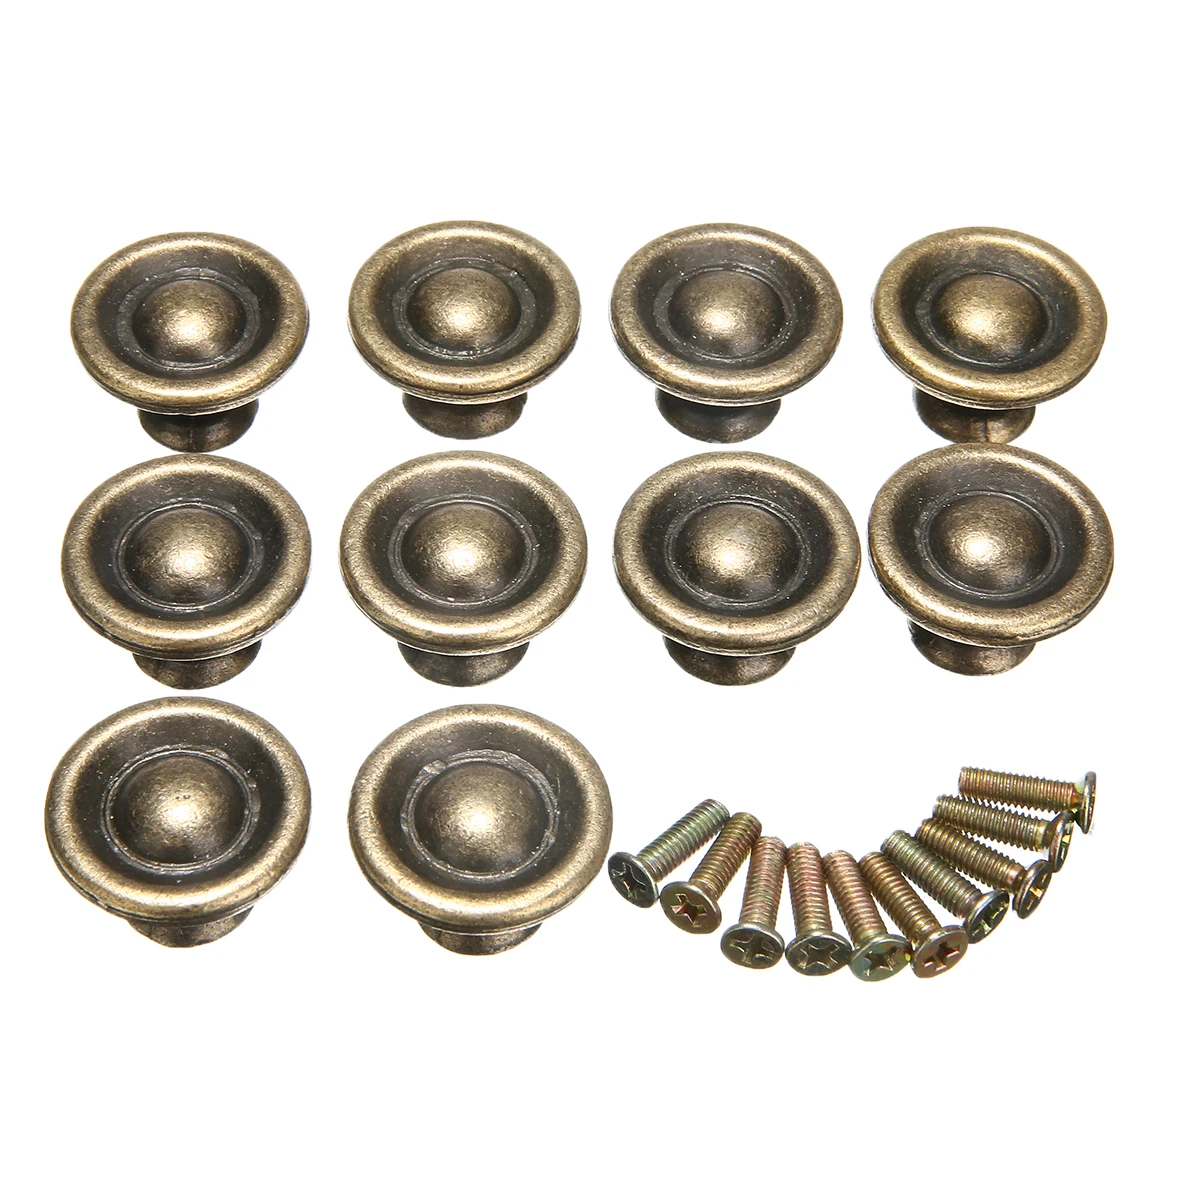 TM Handles Pulls for Cabinets Kitchen Furniture Or Bathroom Room 10PCs European Style Antique Brass Carvings Door Knobs Hole Distance 85mm Drawers Cupboard Dresser FBSHOP